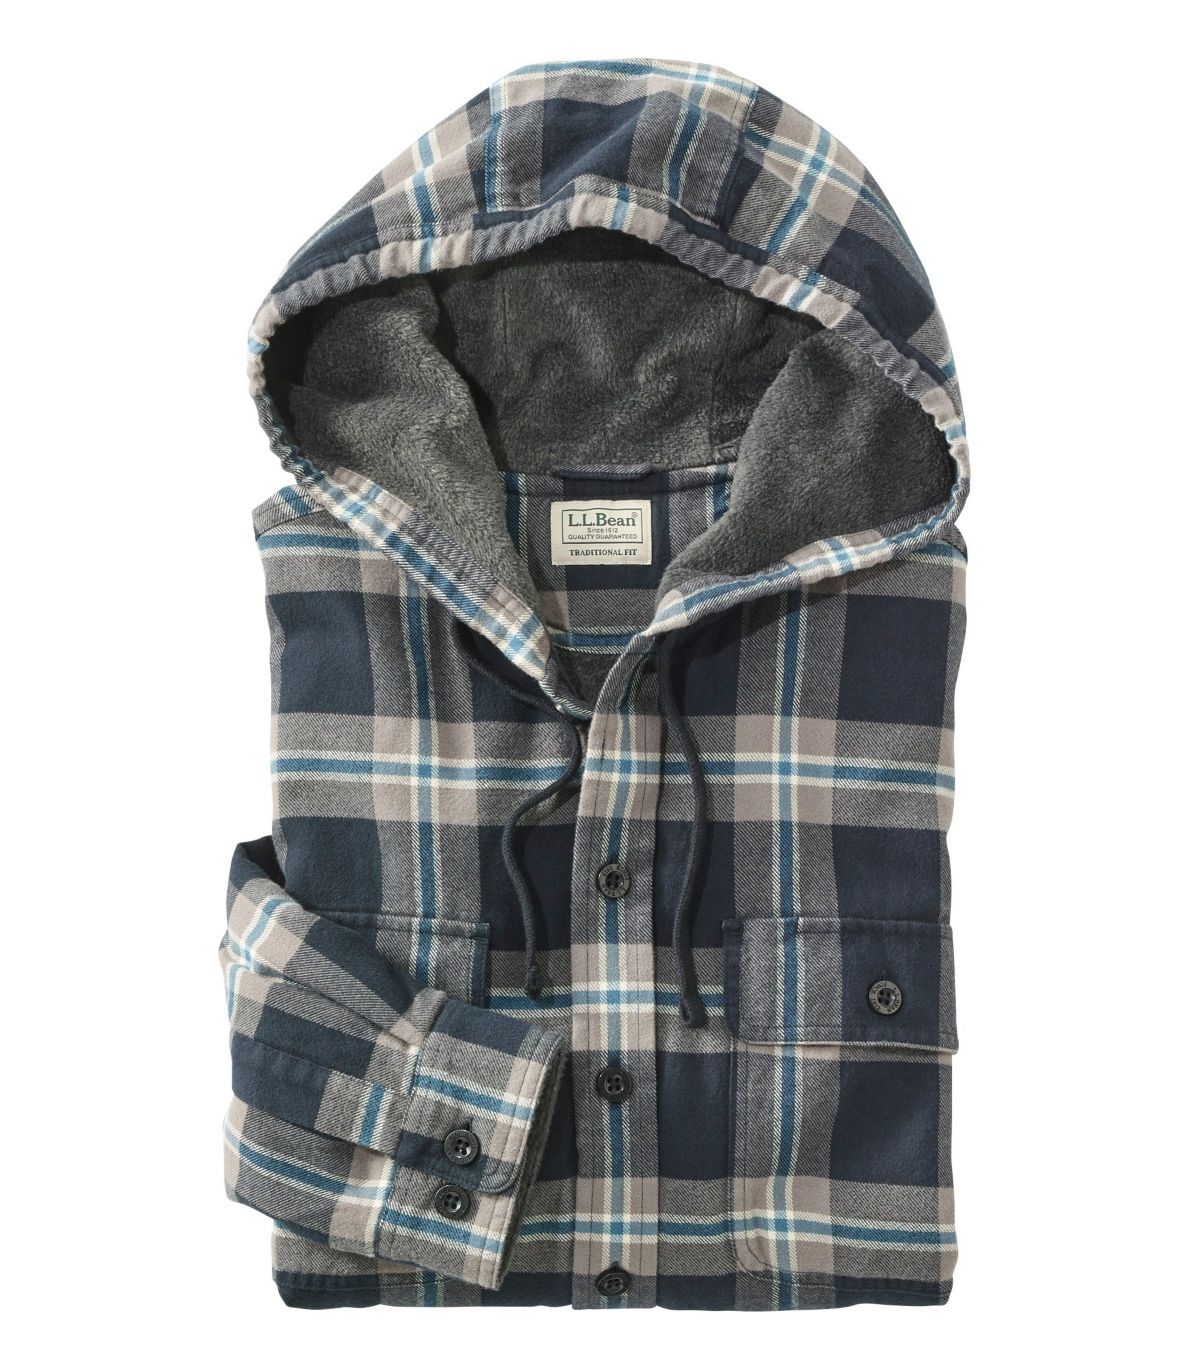 Men's Fleece-Lined Flannel Shirt, Traditional Fit, Hooded